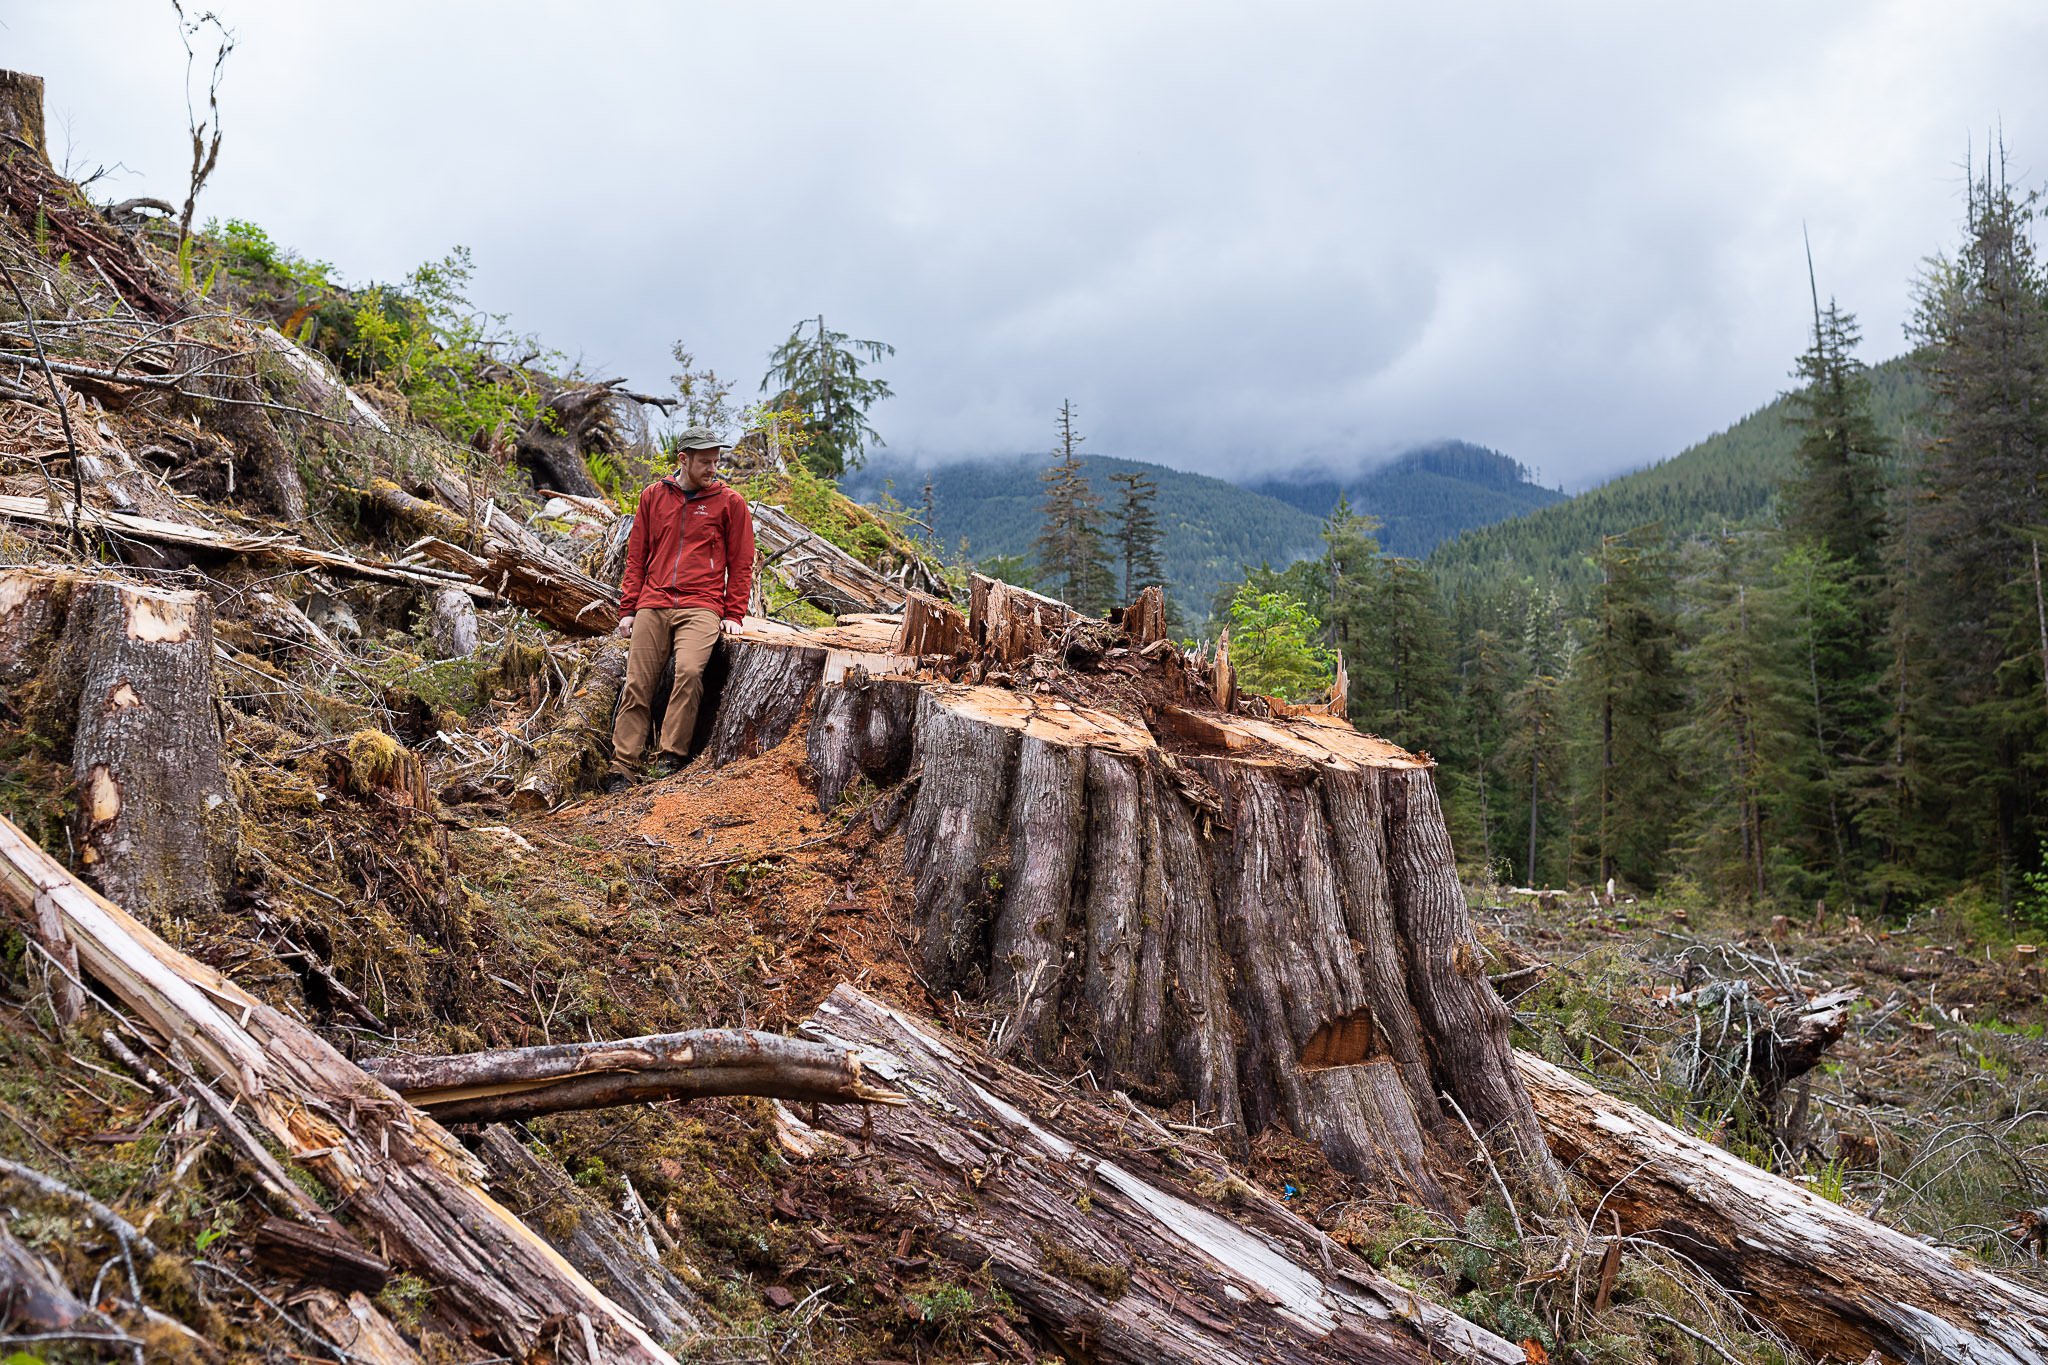  Ancient Forest Alliance Campaigner &amp; Photographer TJ Watt stands atop the stump of an old-growth redcedar tree cut by Teal-Jones in a recommended deferral area in the Caycuse Valley in Ditidaht territory.. Photo credit: TJ Watt - Ancienct Forest